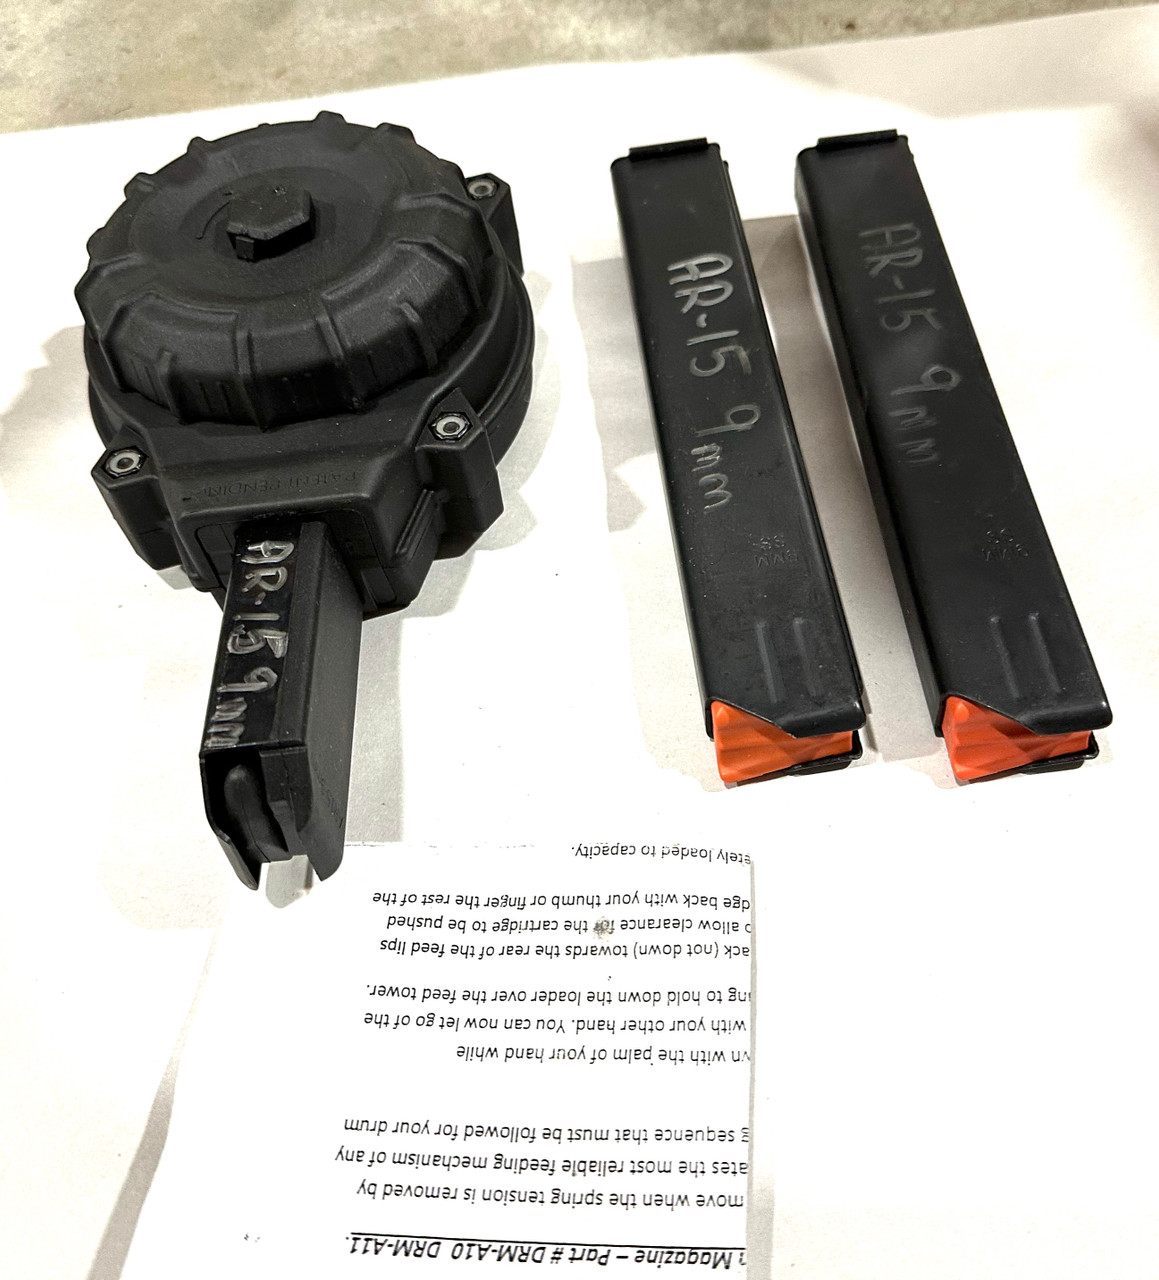 Lot: Colt AR Pattern 9mm Drum and Mags